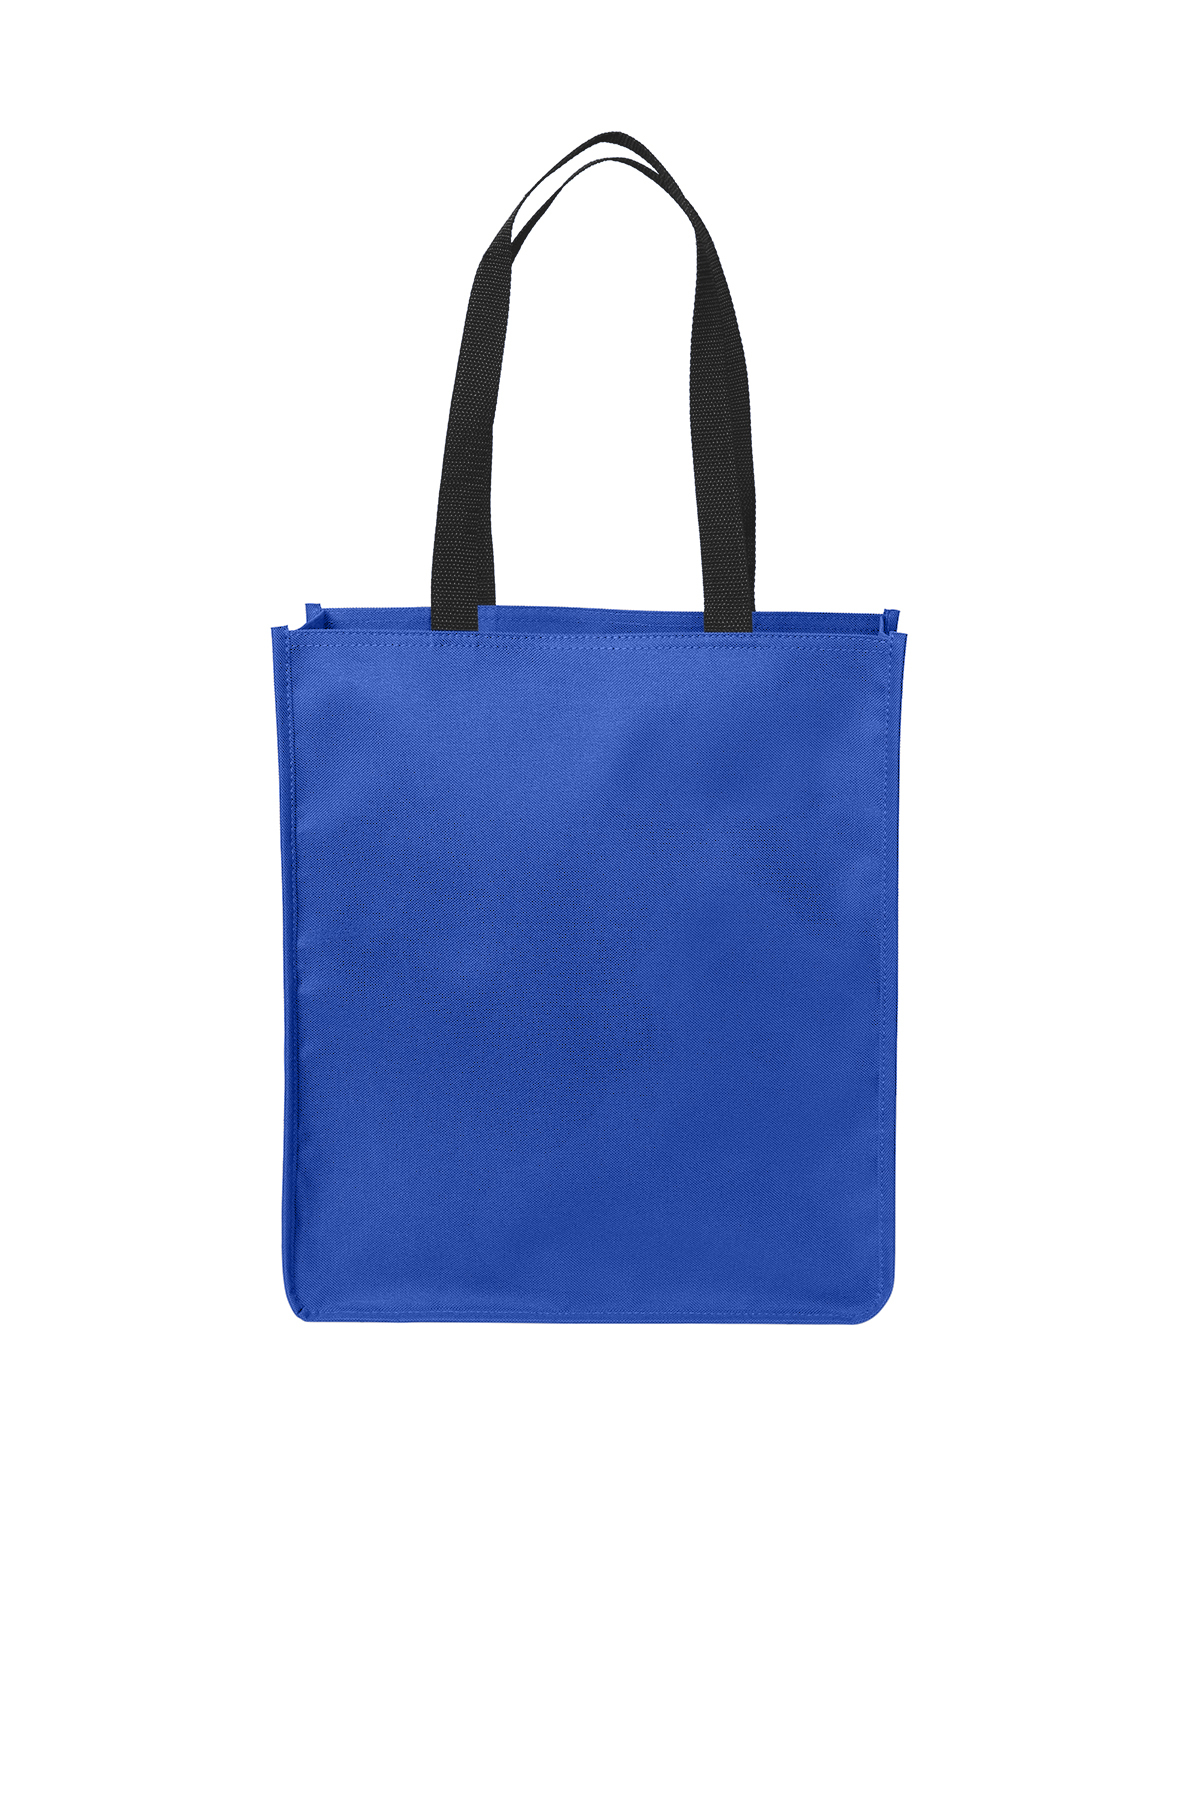 Port Authority Upright Essential Tote | Product | SanMar